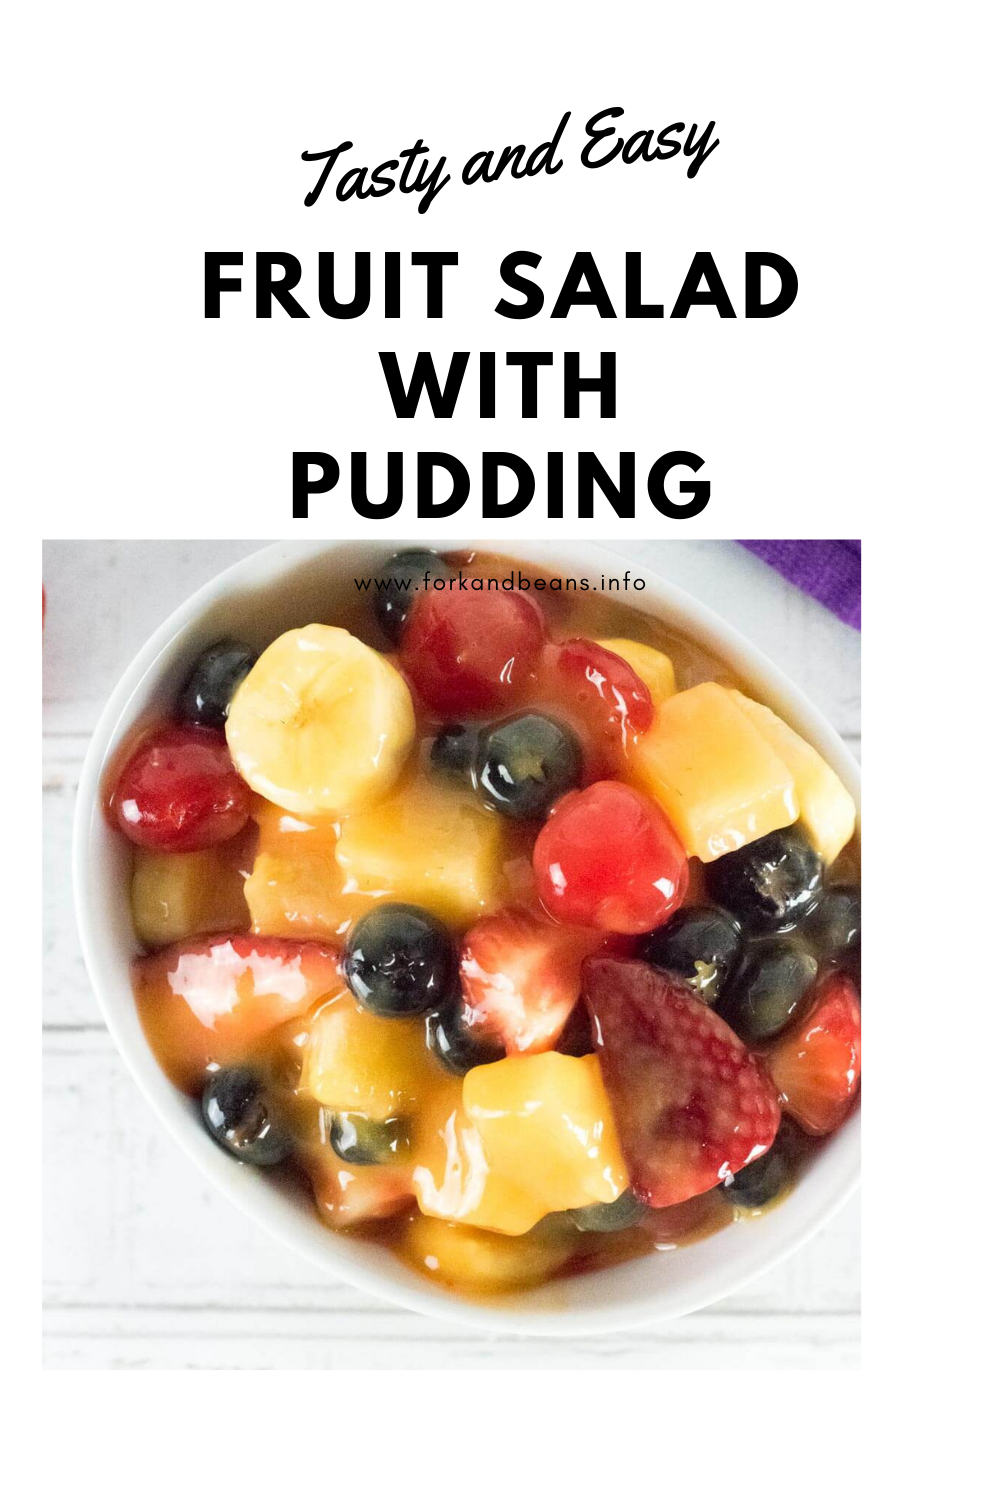 FRUIT SALAD WITH PUDDING